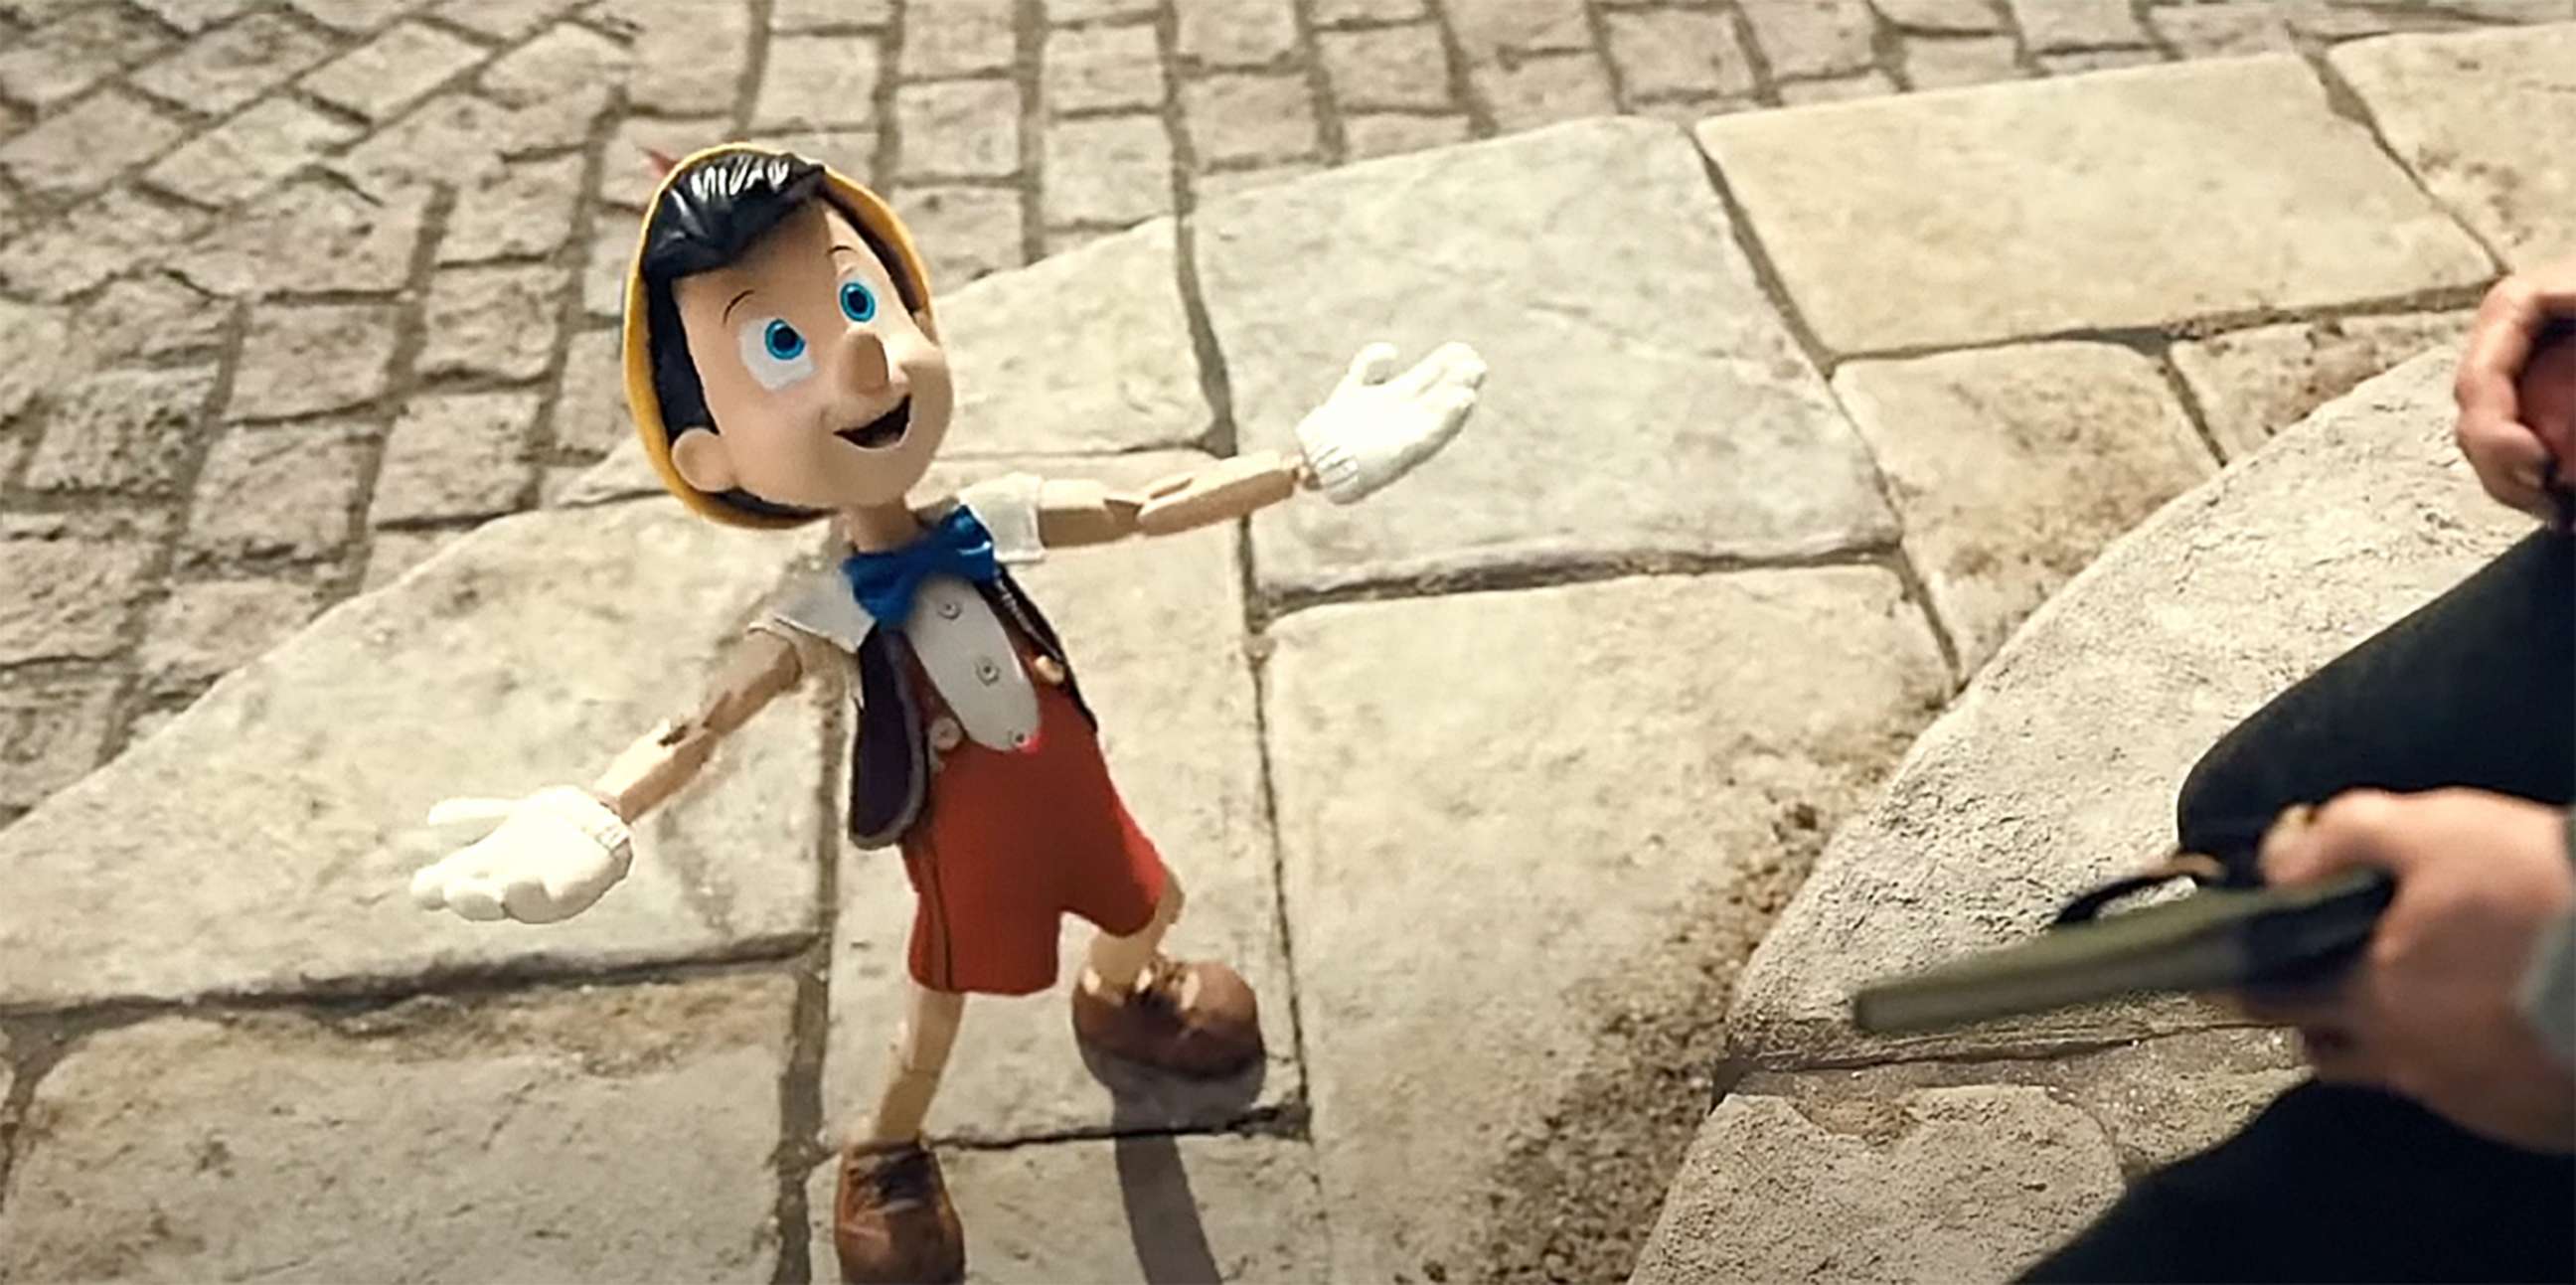 PHOTO: A scene from the new movie "Pinocchio."